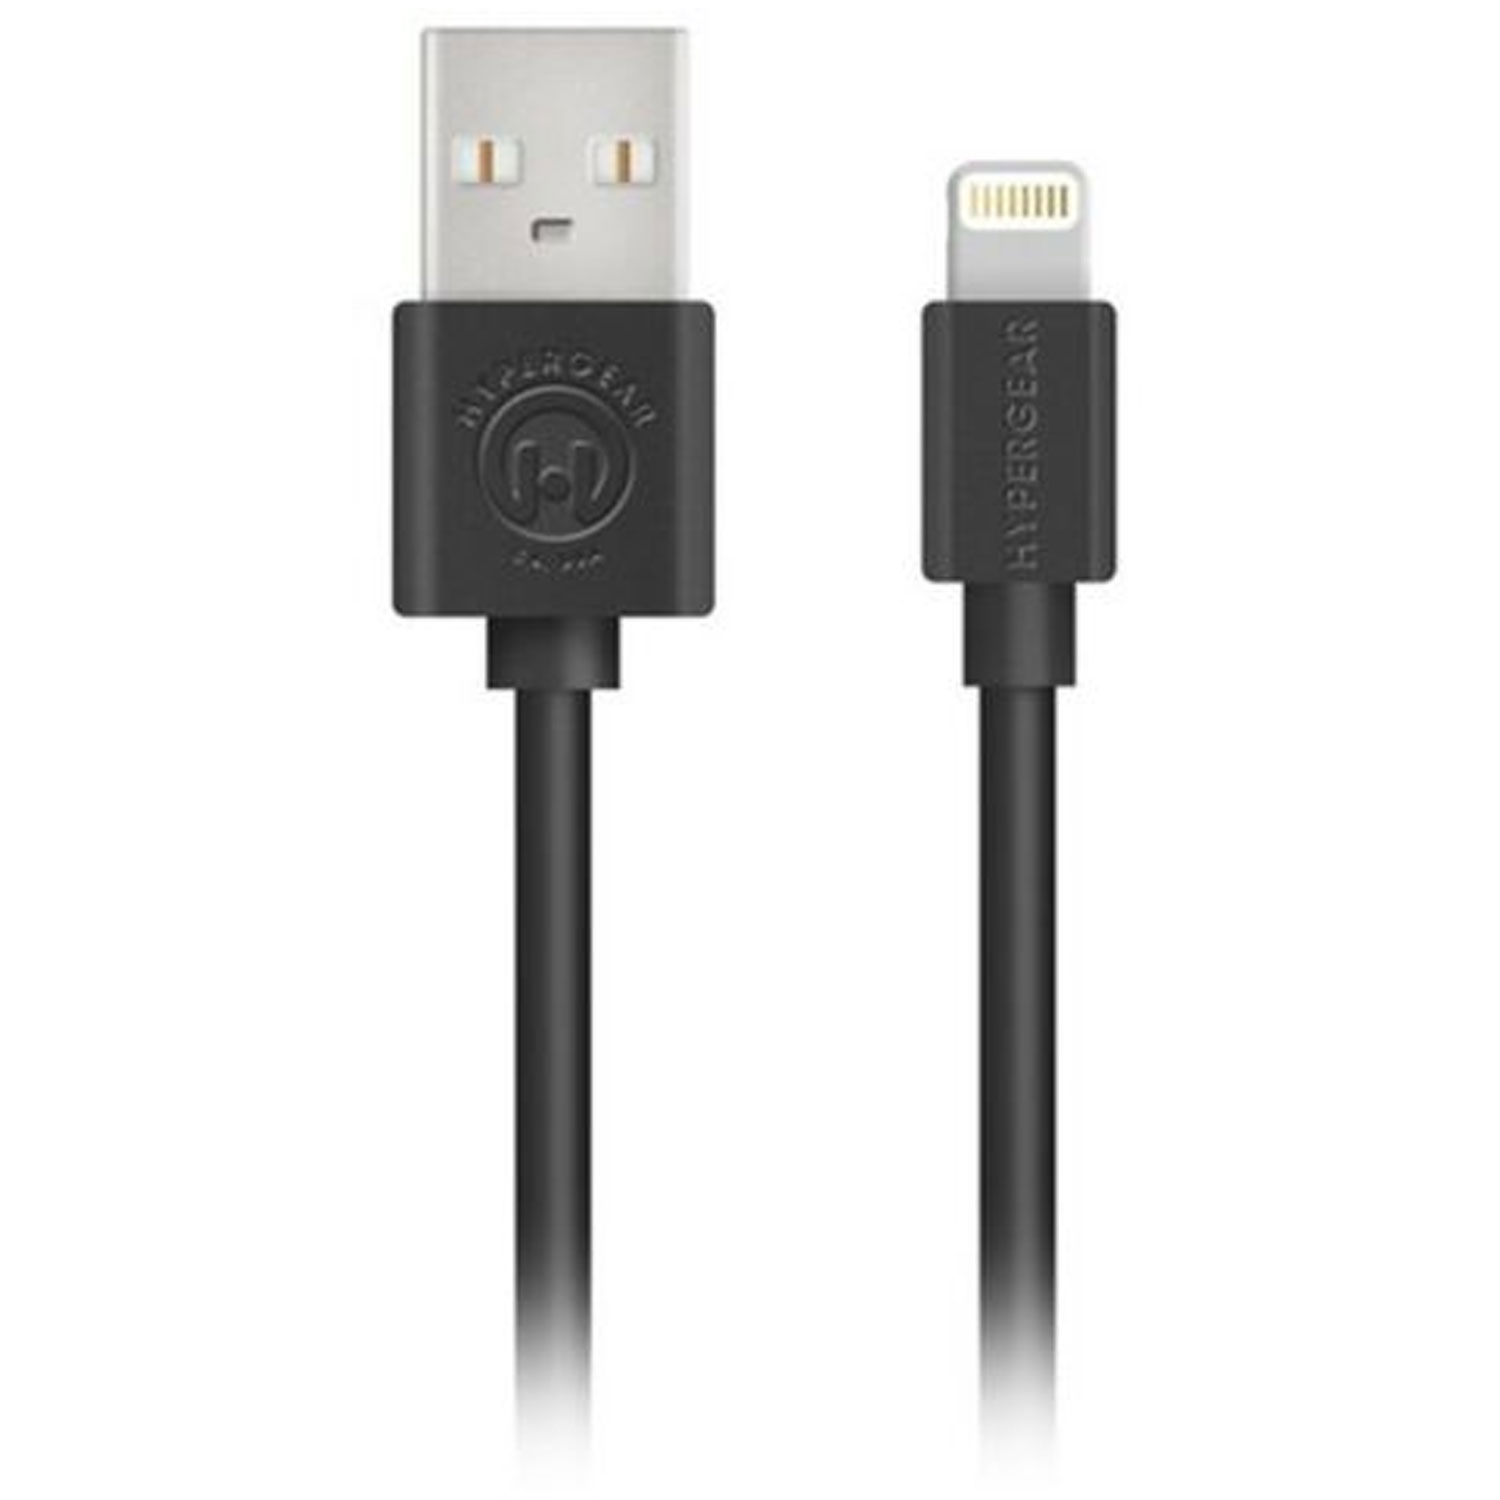 Hypergear Mfi Lightning Charge And Sync USB Cable 4FT